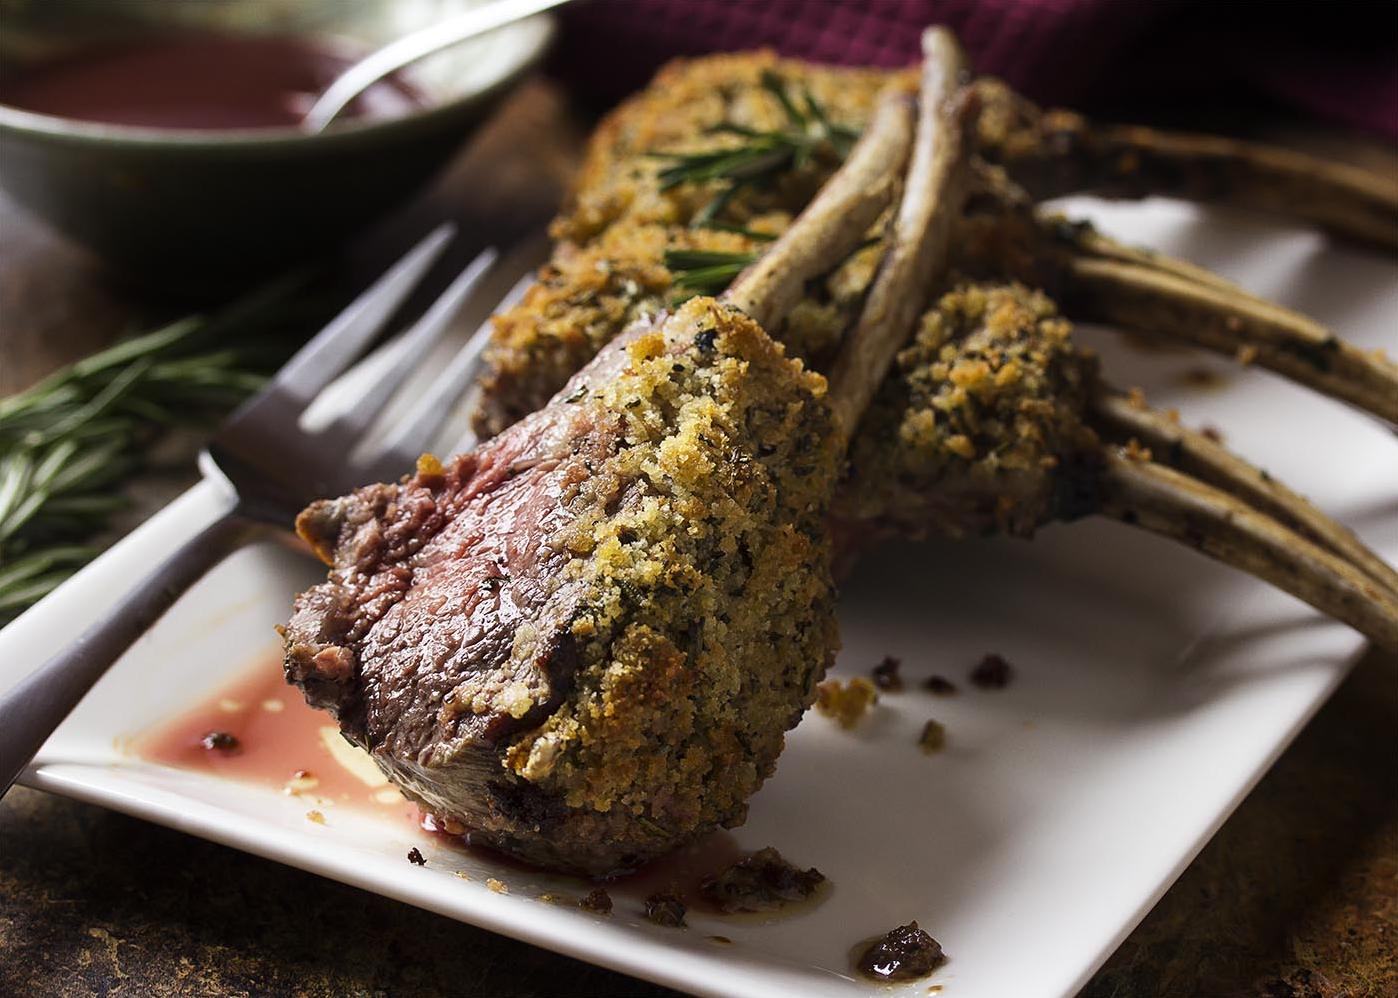  The perfect holiday centerpiece - Roast Rack of Lamb with Cranberry and Red Wine Sauce